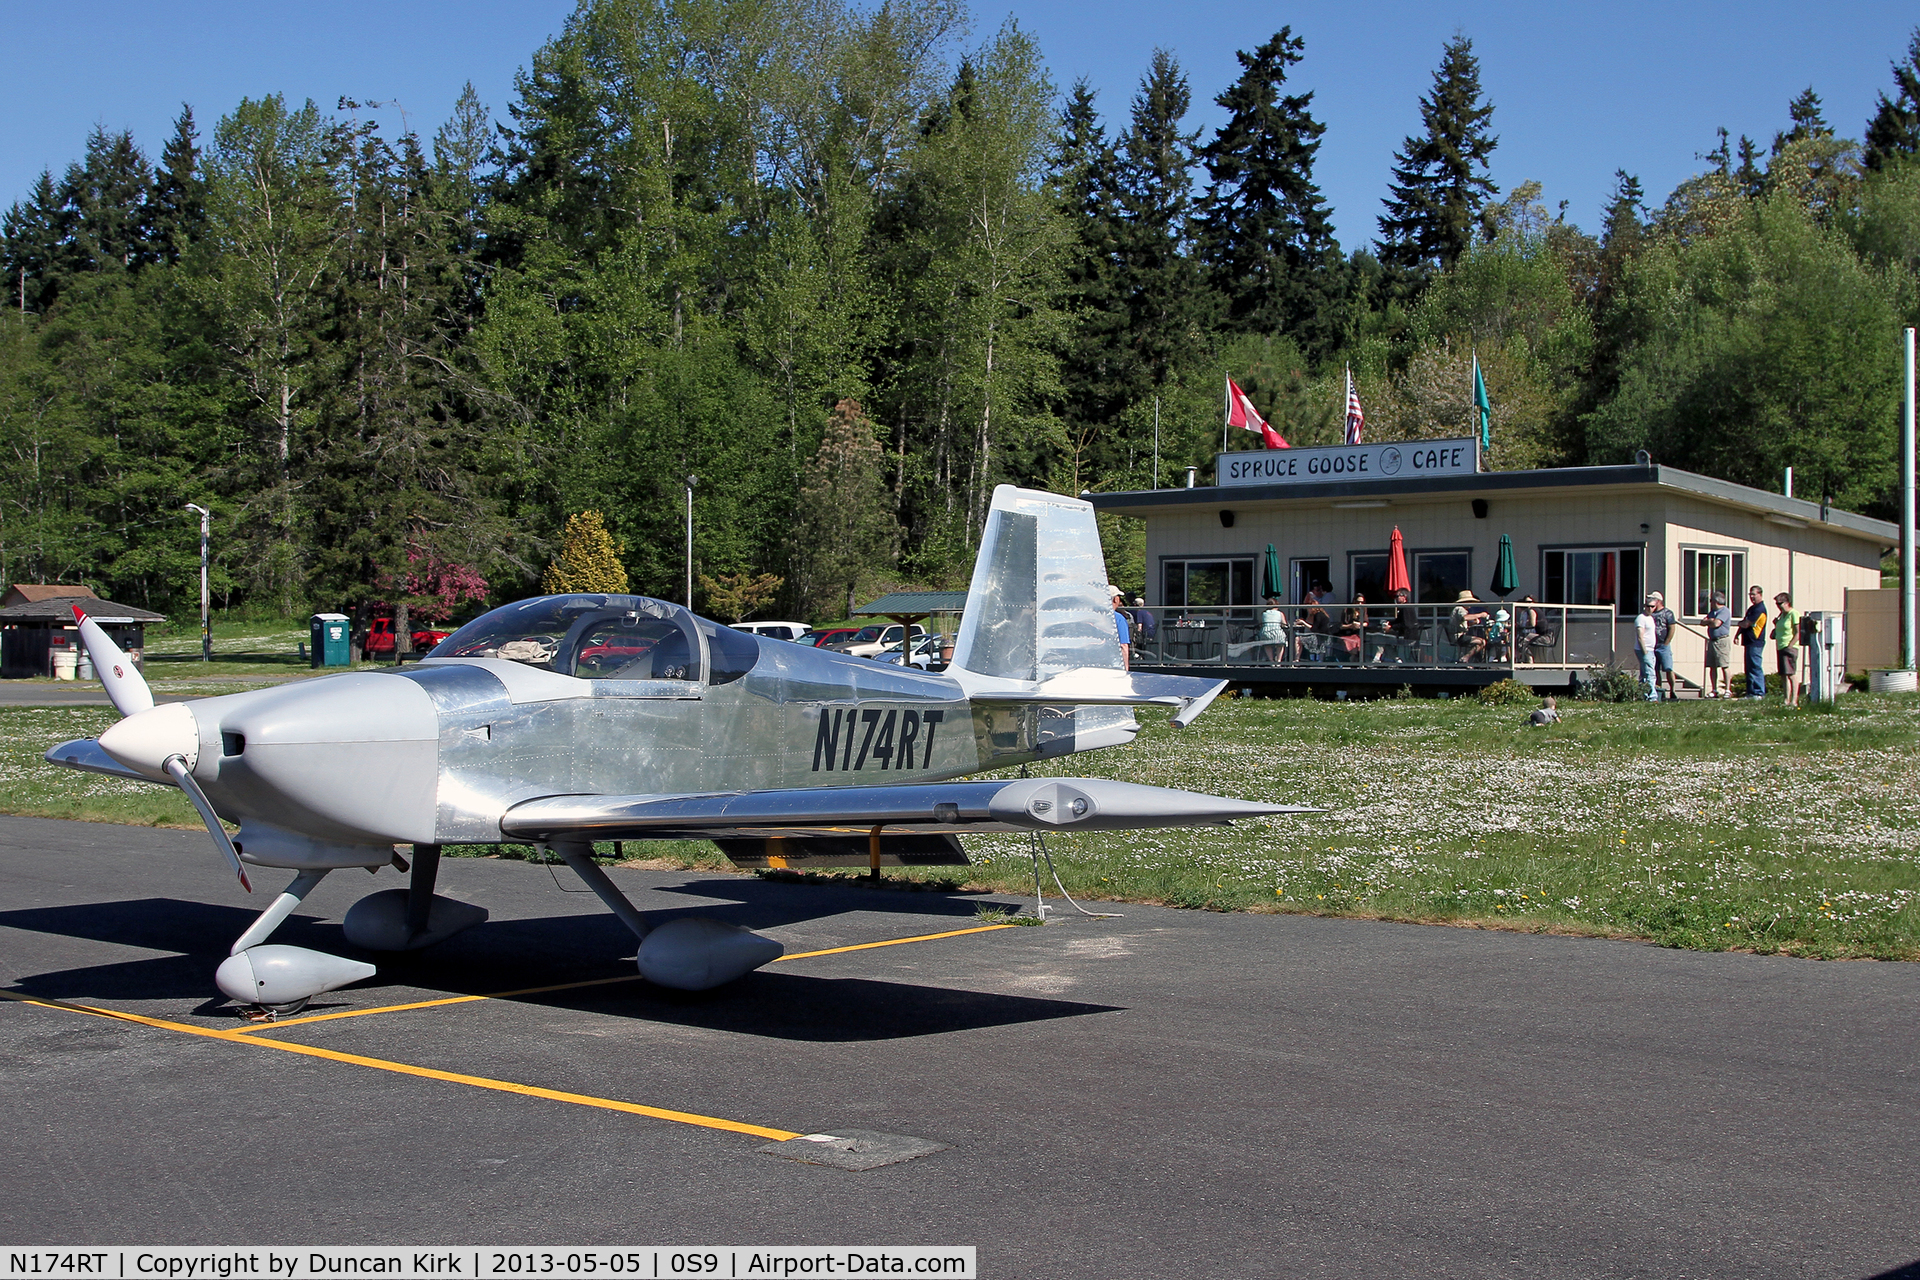 N174RT, Vans RV-7A C/N 73315, The convenient and recommended Spruce Goose cafe at Port Townsend